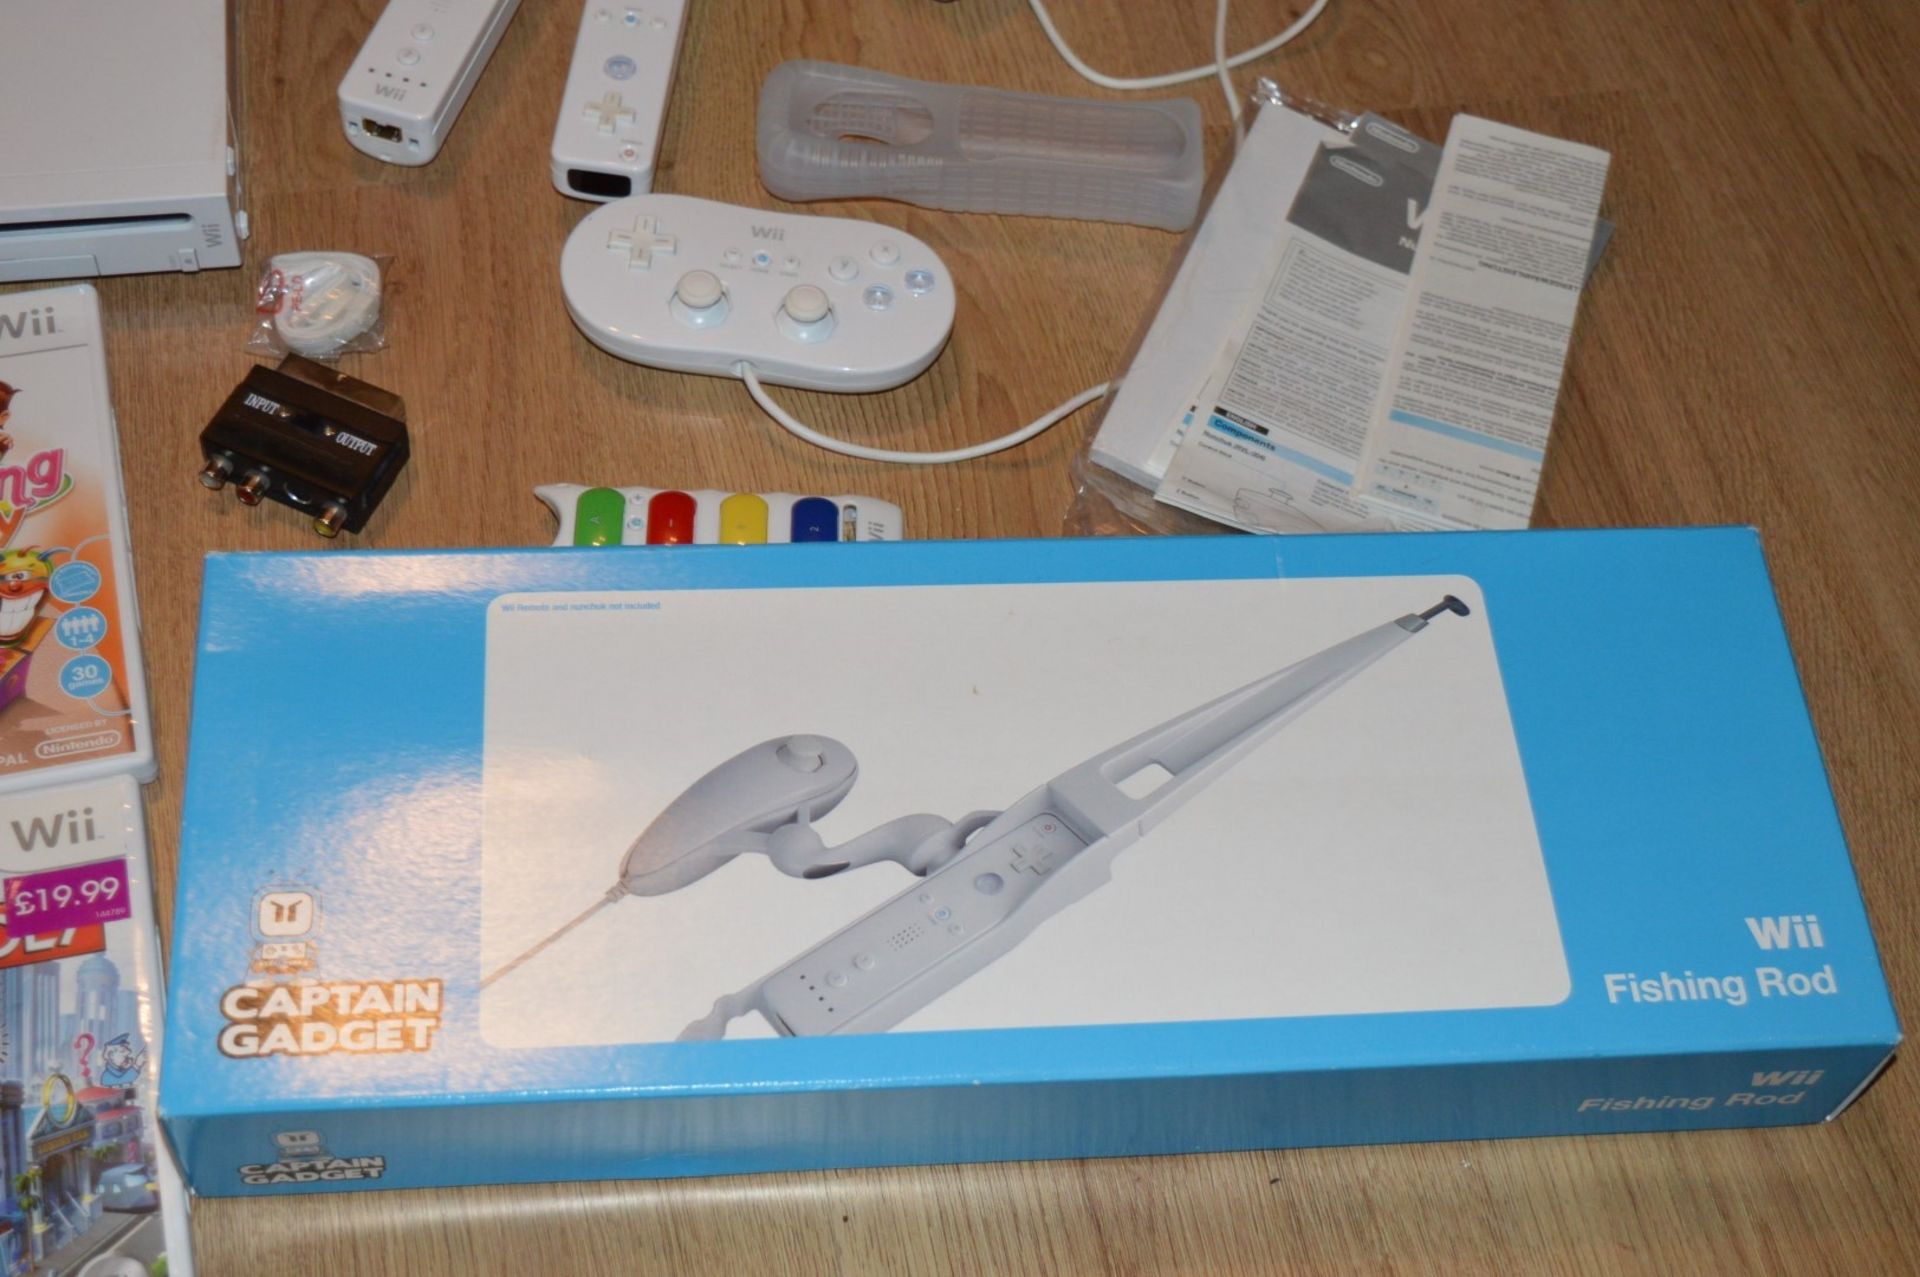 1 x Nintendo Wii Games Console With Wii Fit Board, Various Controllers, Accessories, Fishing Rods - Image 6 of 7